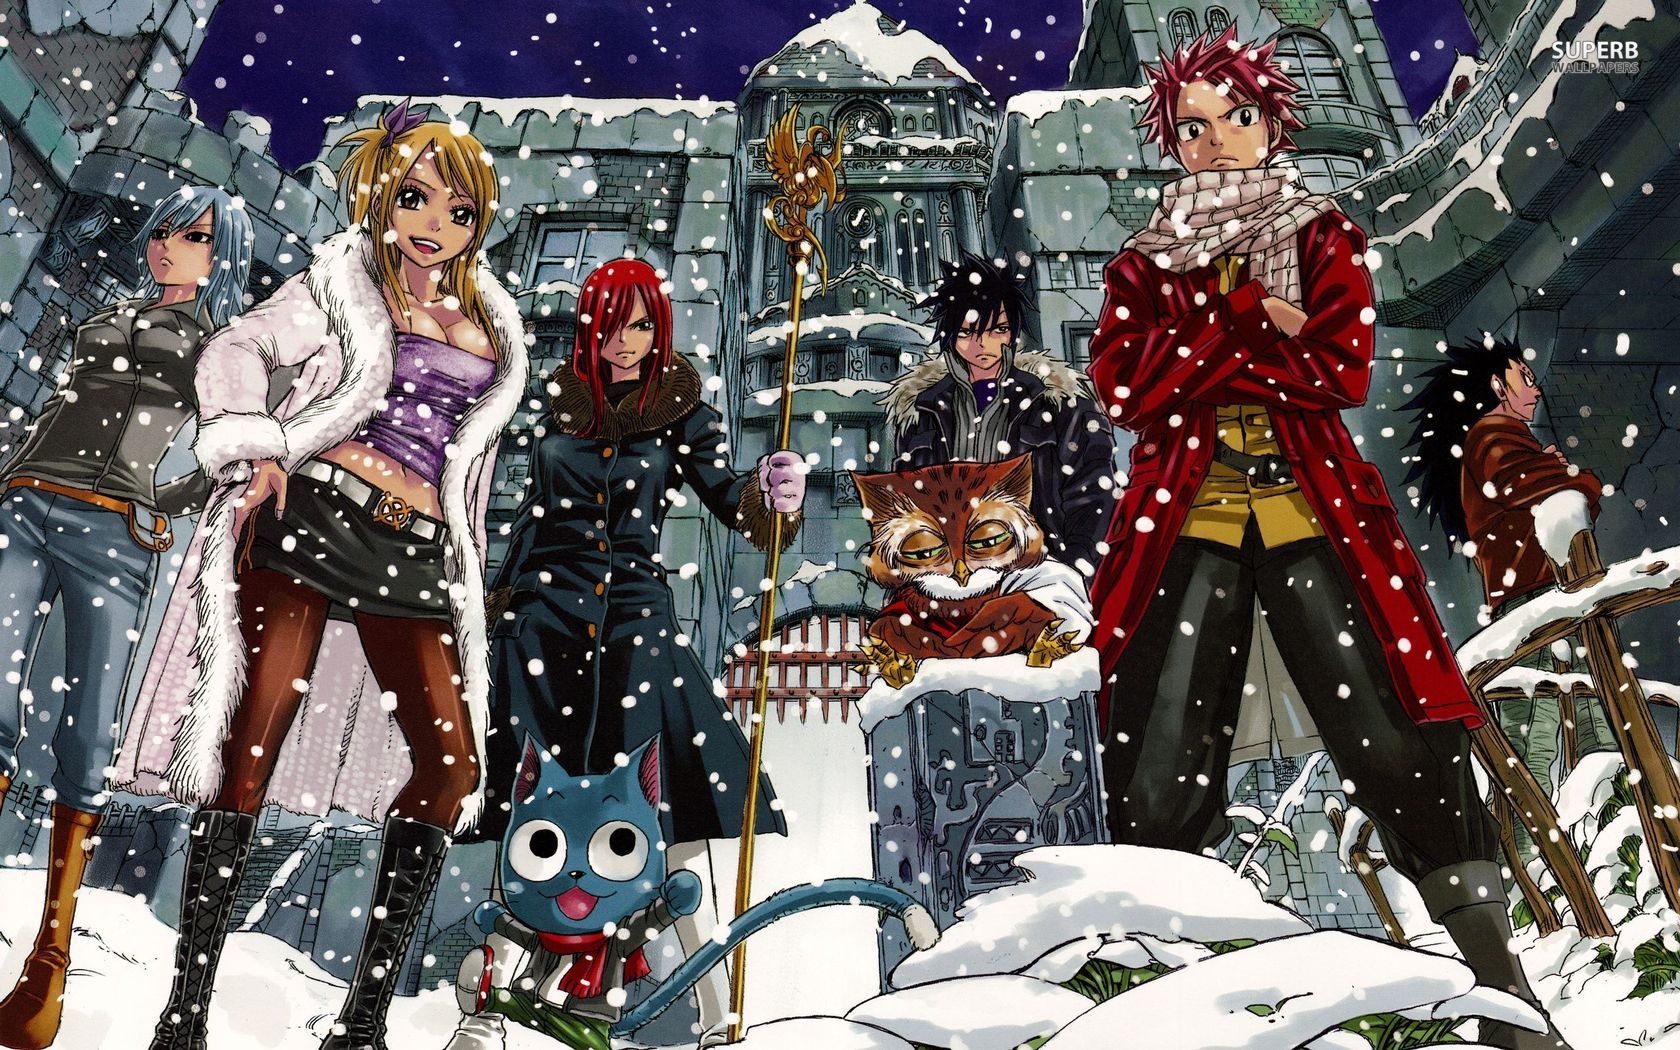 Fairy Tail wallpaper - Anime wallpapers - #26308